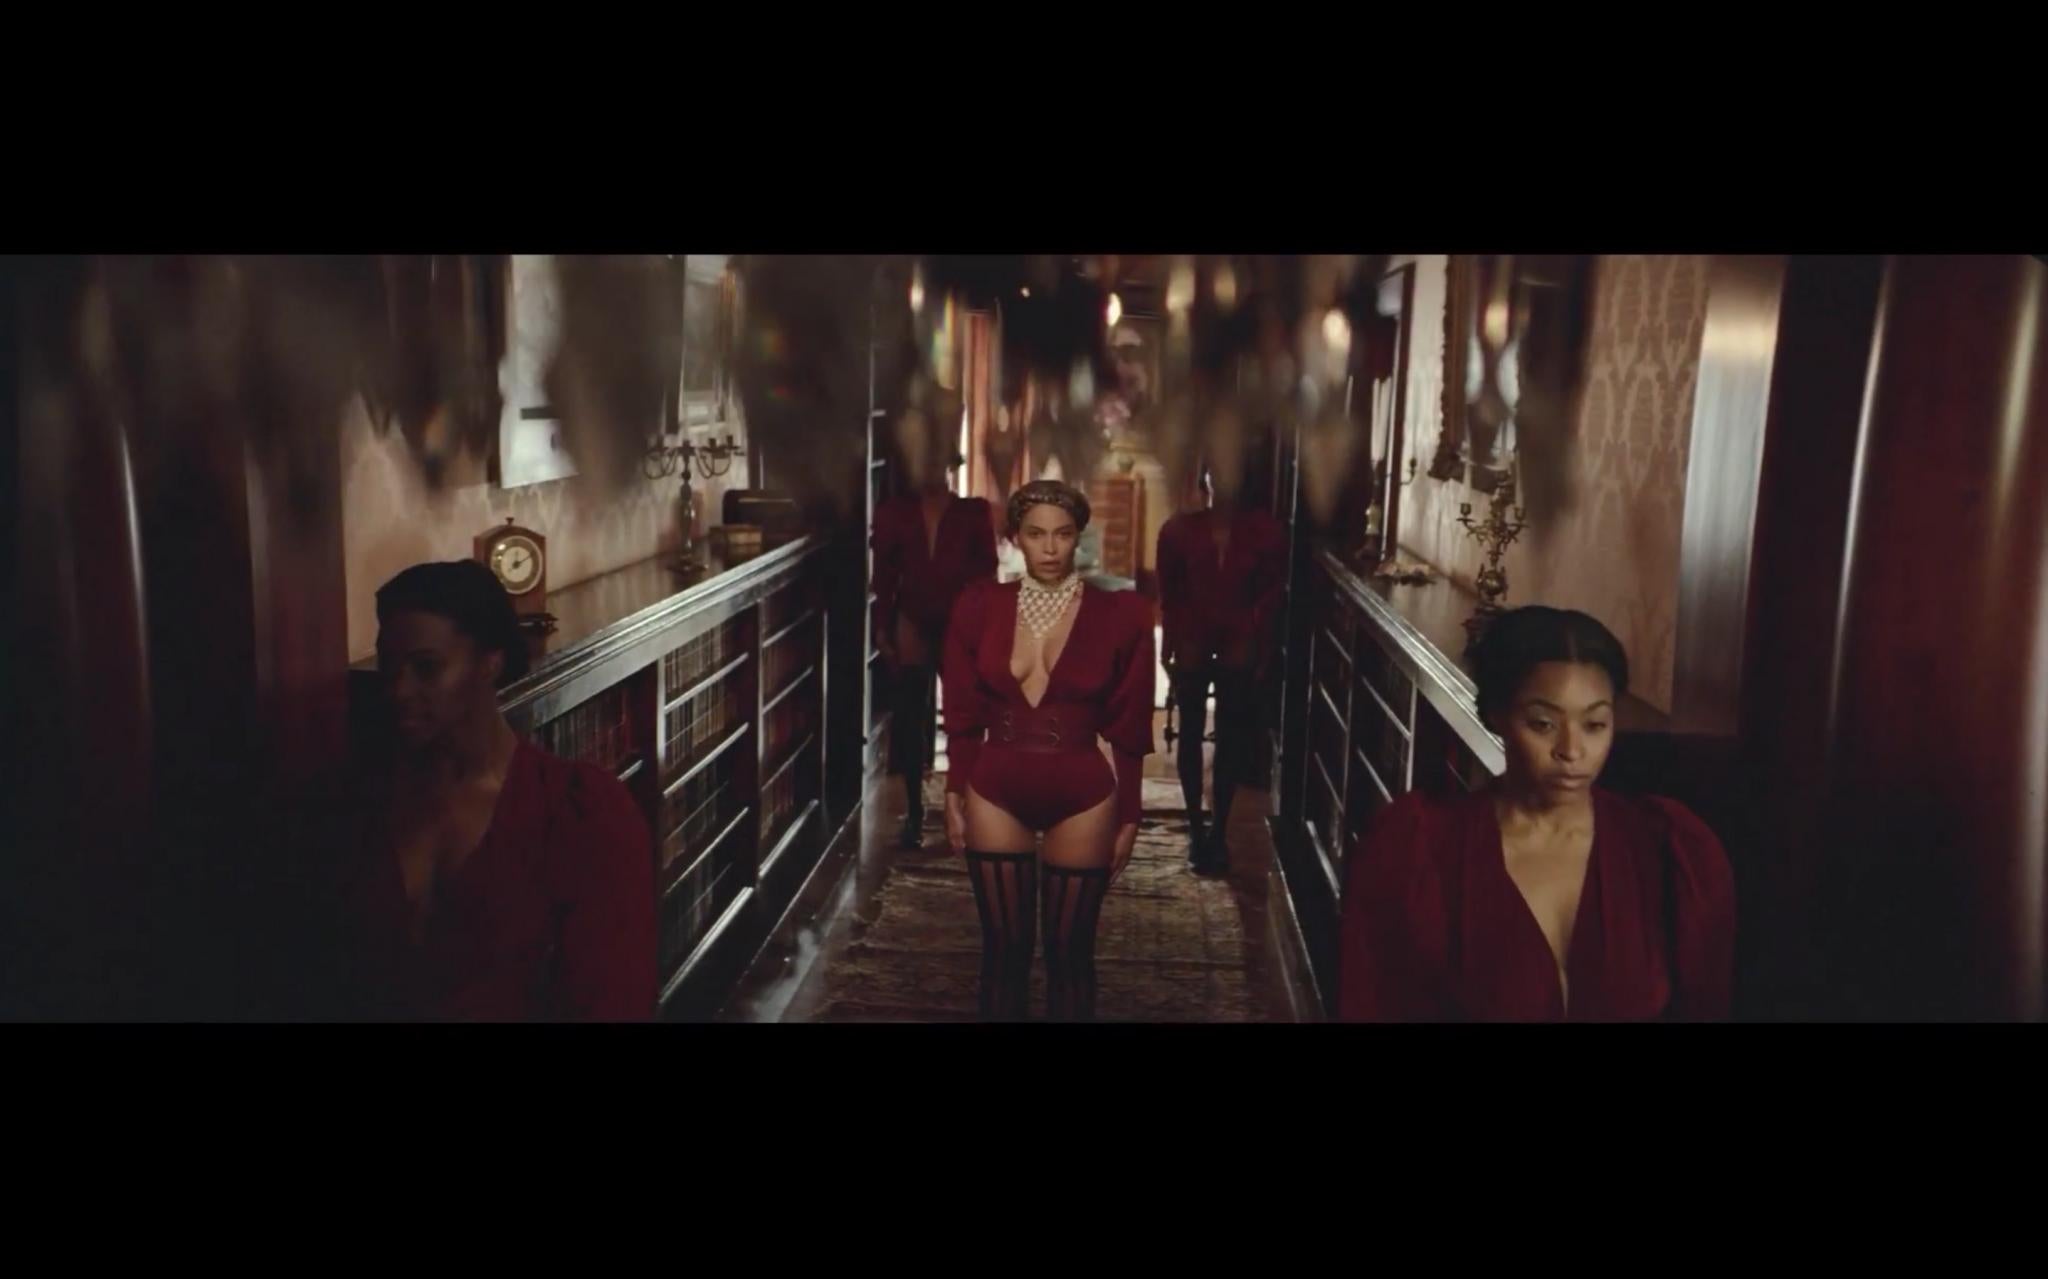 Can We Talk About the Epic Fashion Moments in Beyonce's 'Formation' Video?